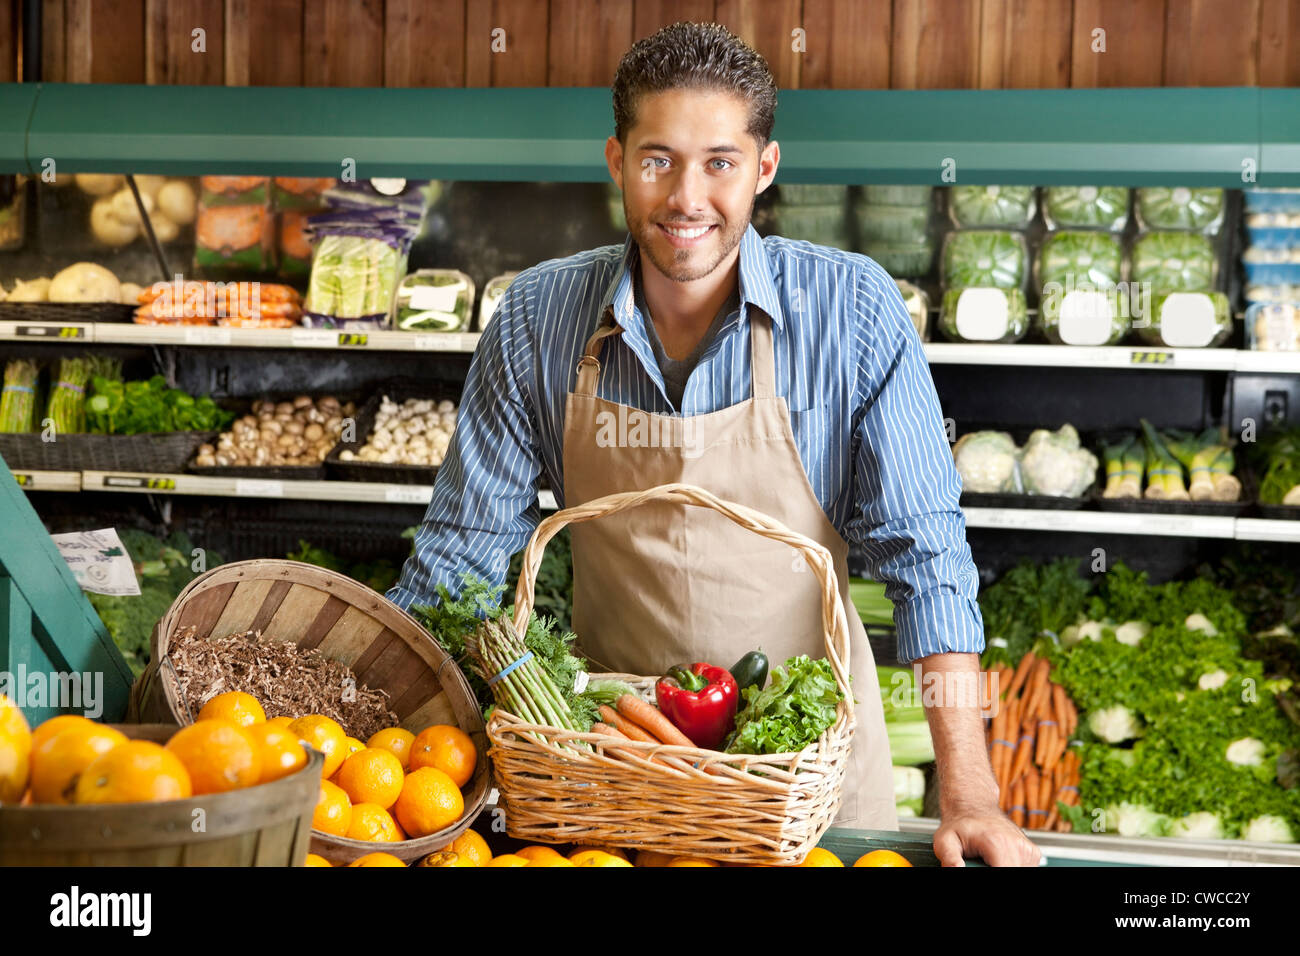 Portrait of a happy young salesman with vegetable basket in supermarket Stock Photo